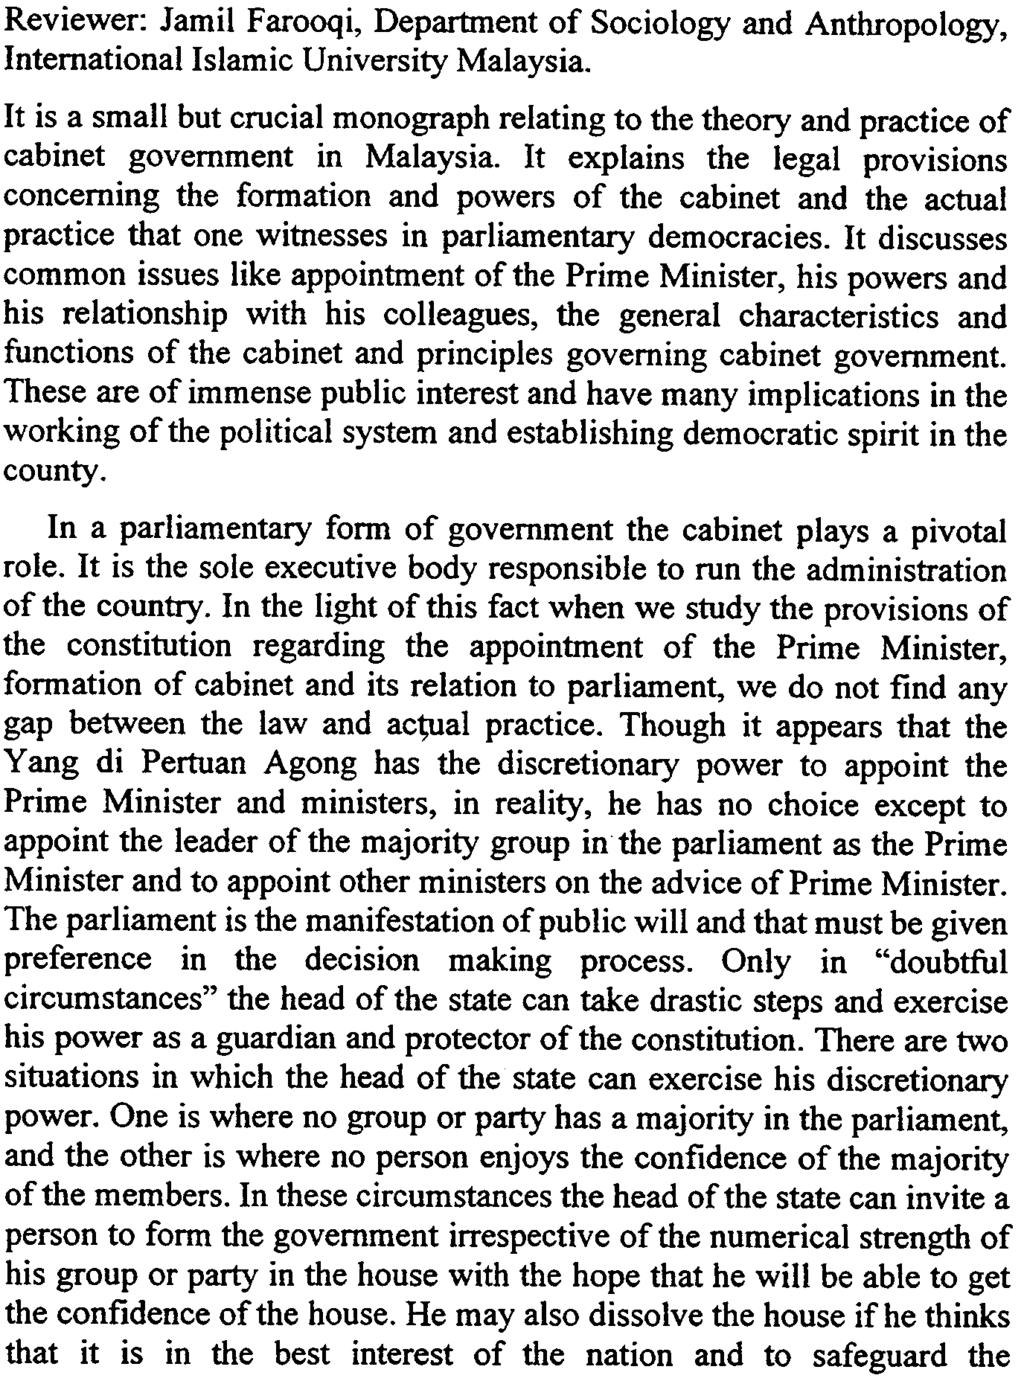 BOOK REVIEW [247] Cabinet Principles in Malaysia: The Law and Practice by Abdul Aziz Bari. Kuala Lumpur: Univision Press, 1999,94 pp. ISBN 983-40026-0-2.